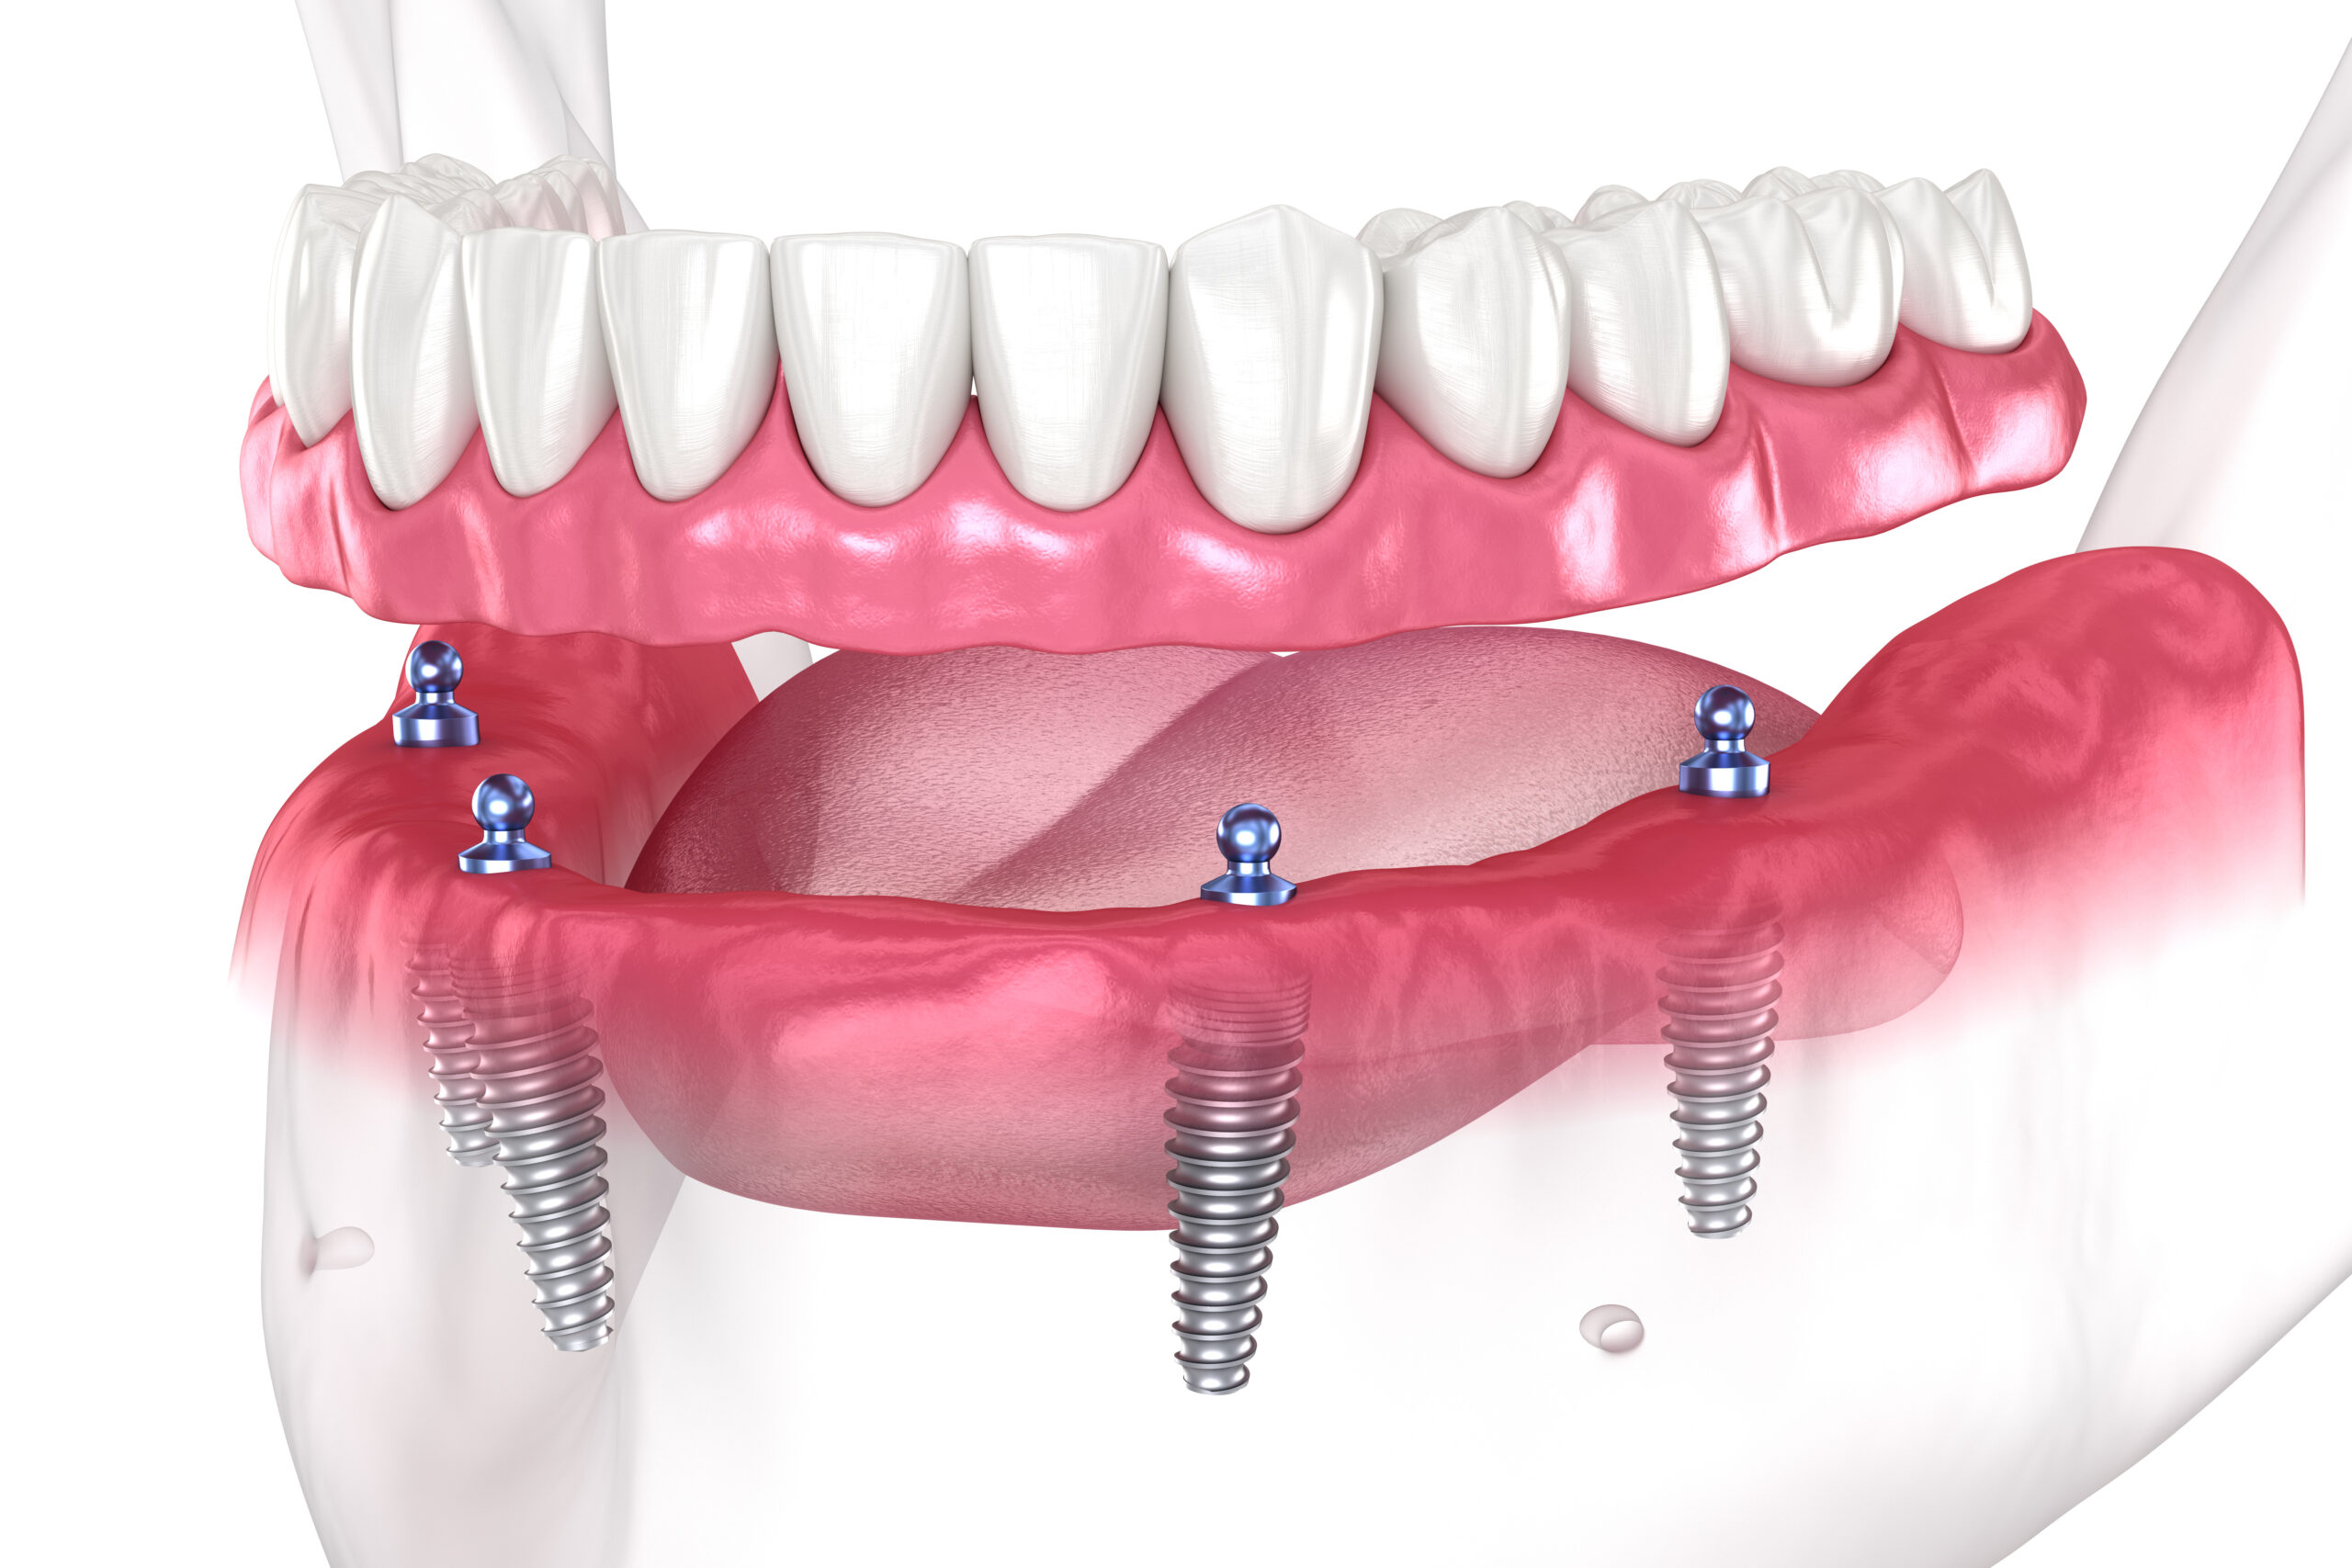 Can I Have A Cost-Effective New Smile With Full Mouth Dental Implants In East Lansing, MI?